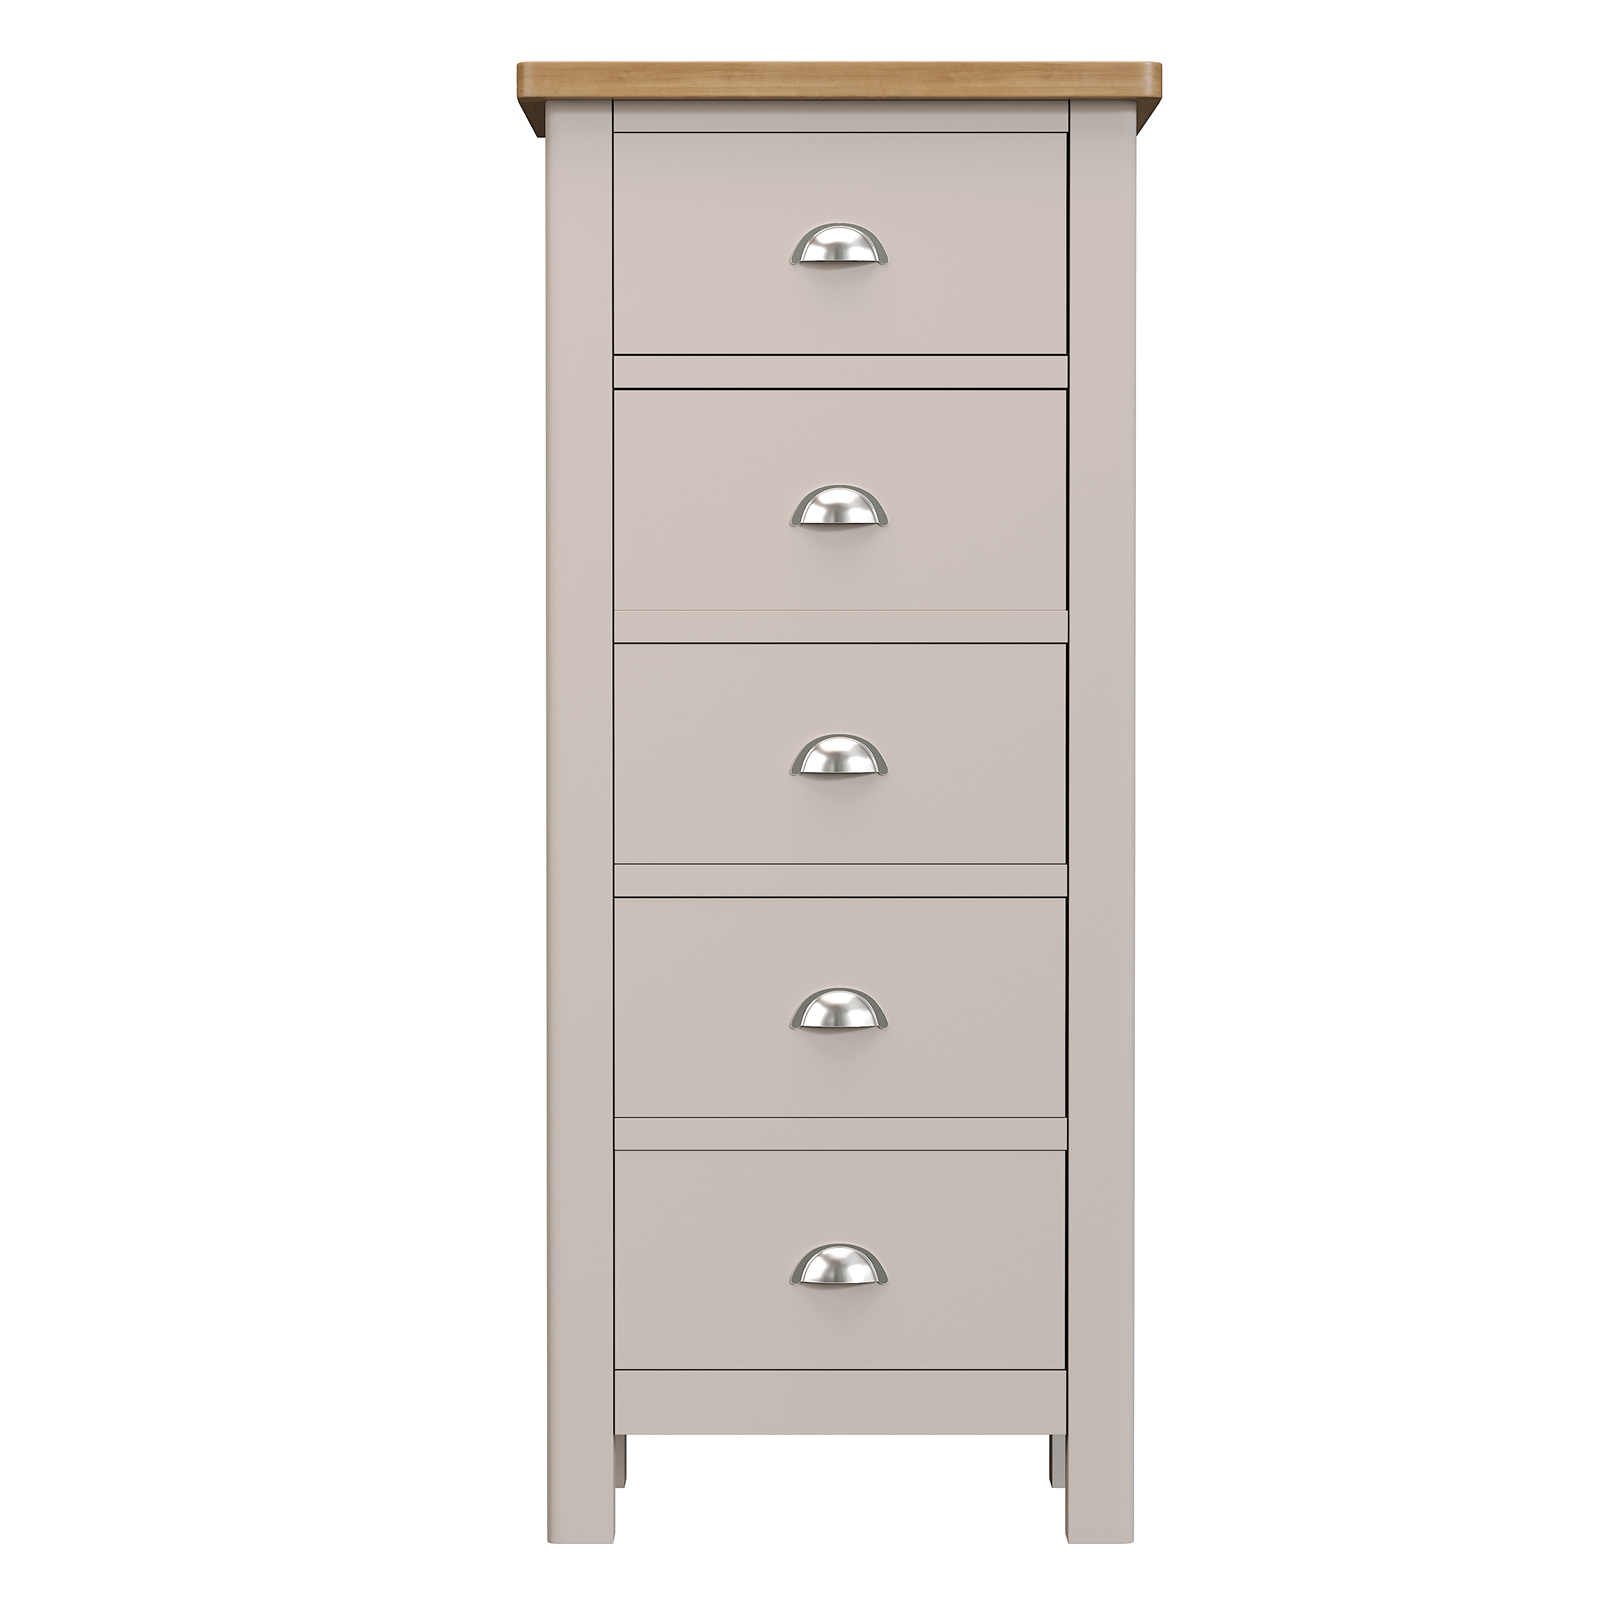 Padstow 5 Drawer Narrow Chest of Drawers - Truffle